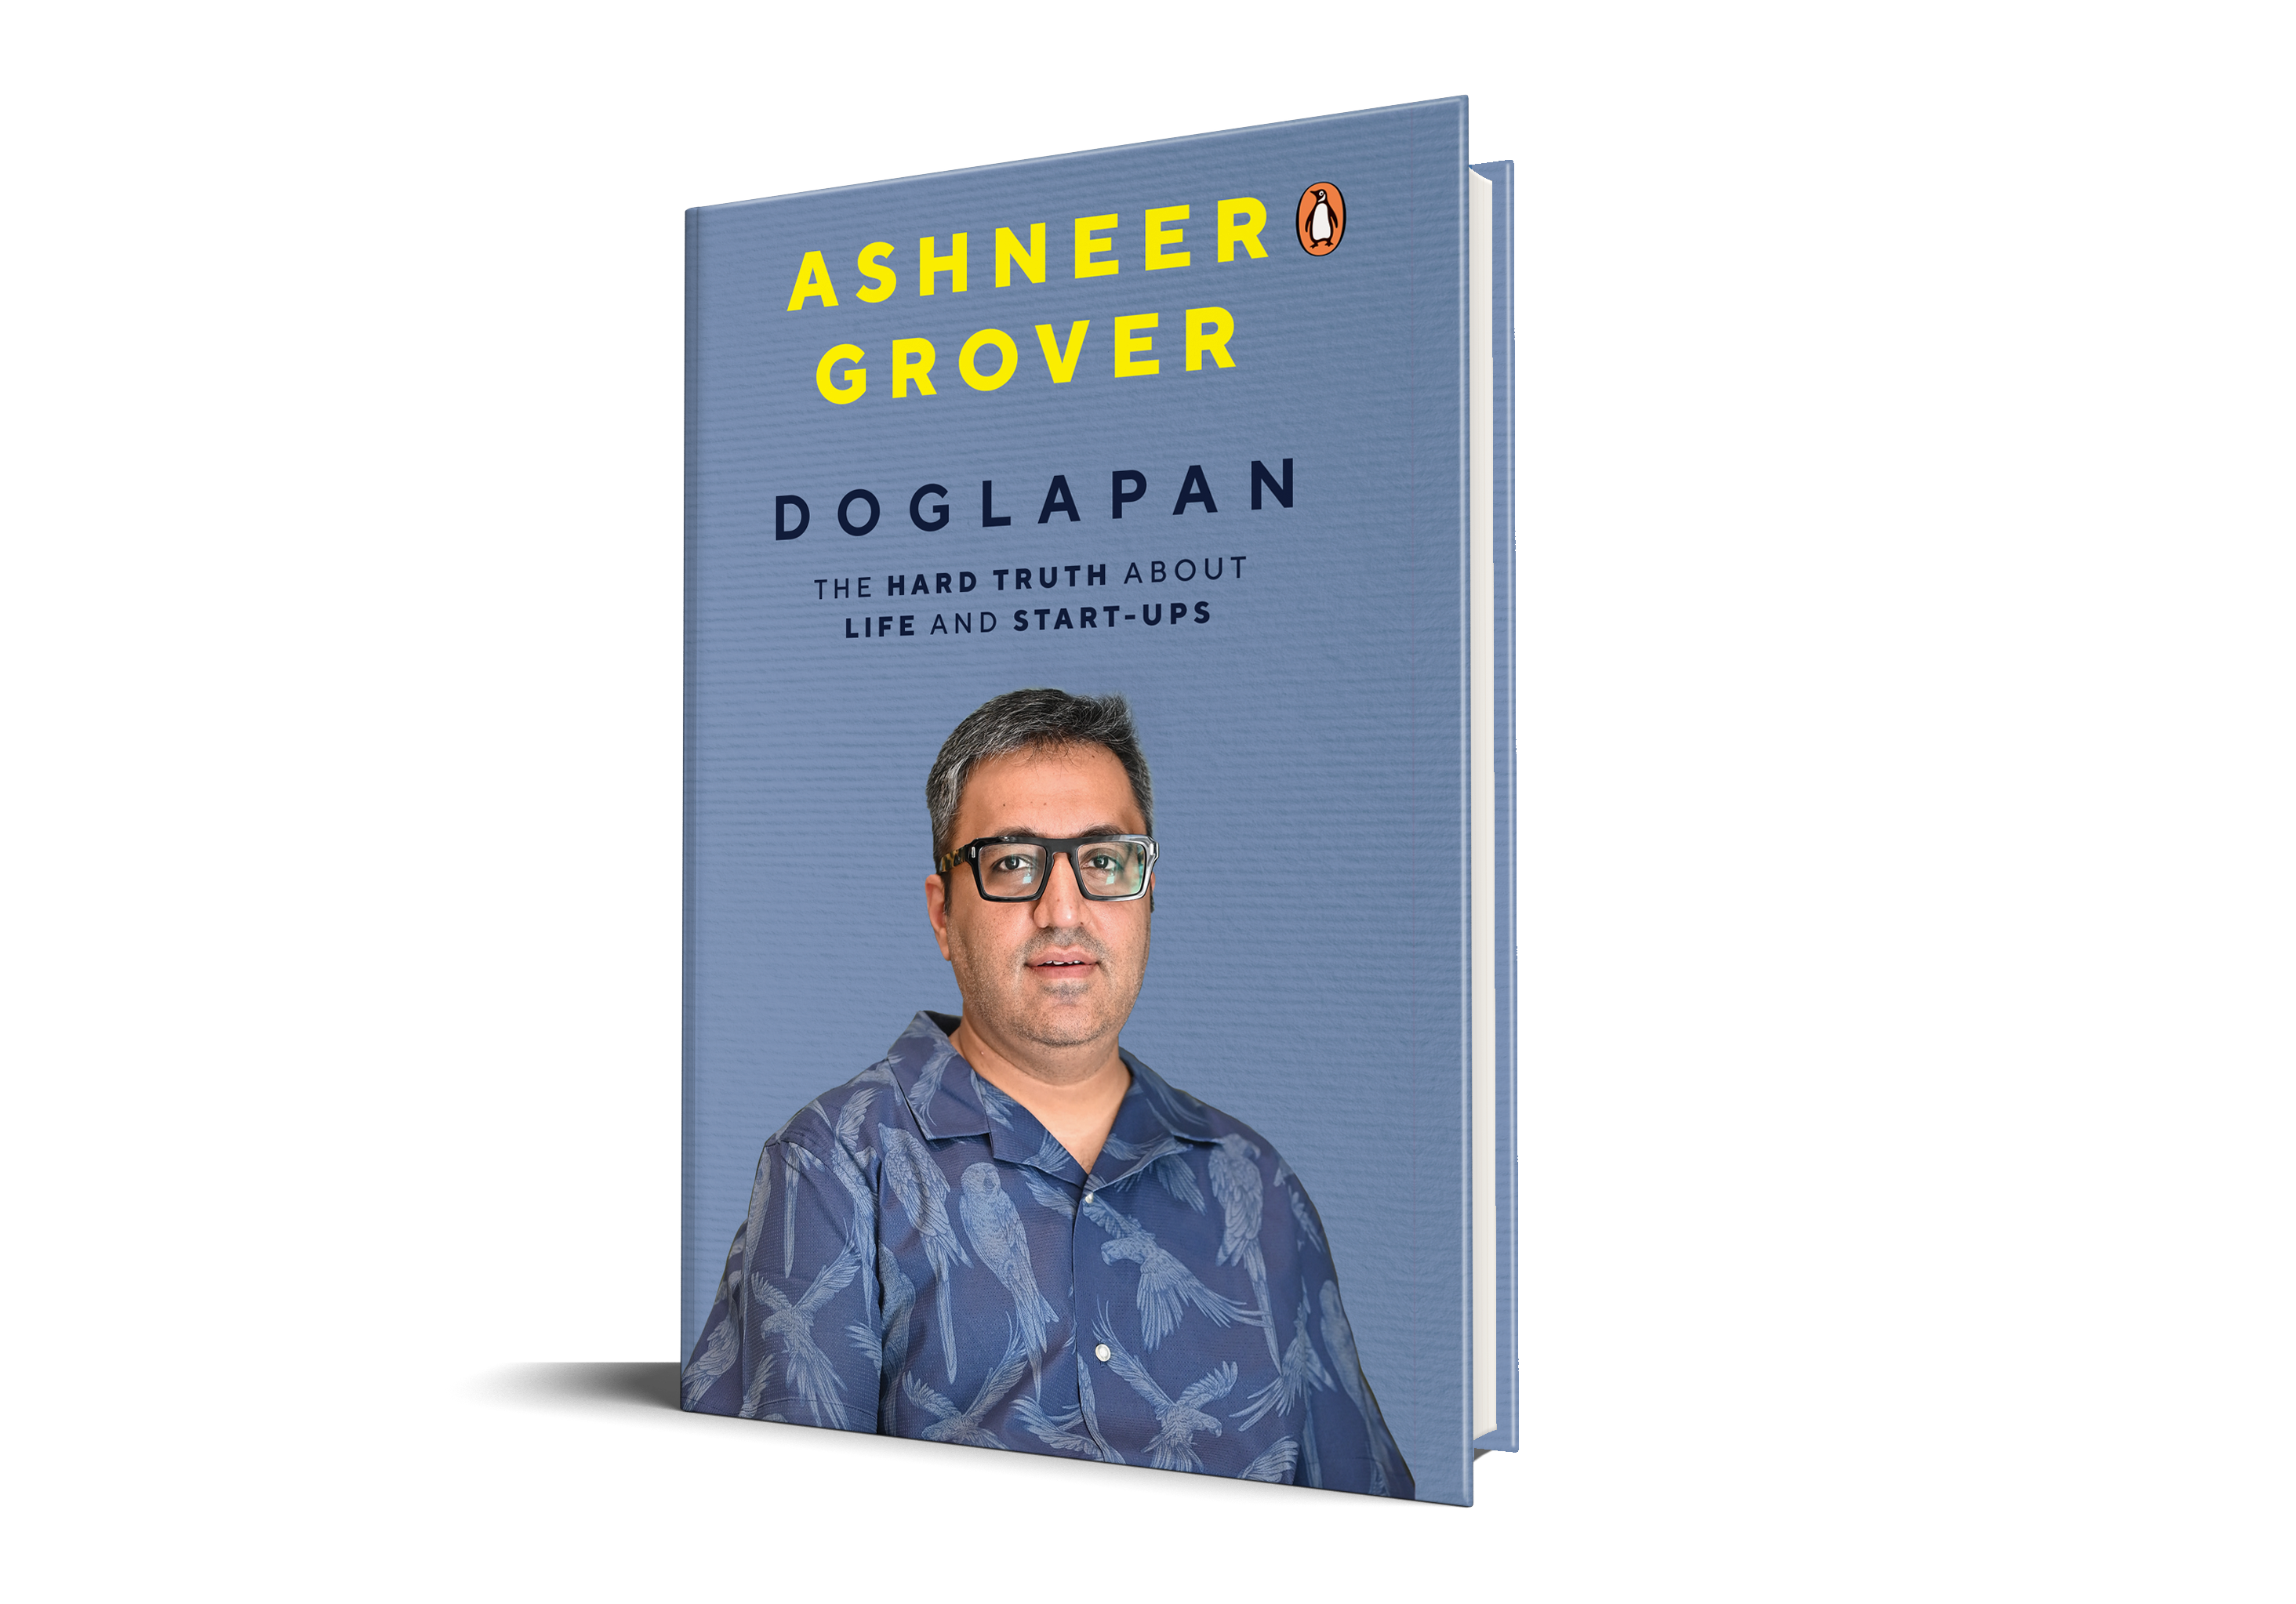 ‘Doglapan’ reveals the hard truth about life and start-ups